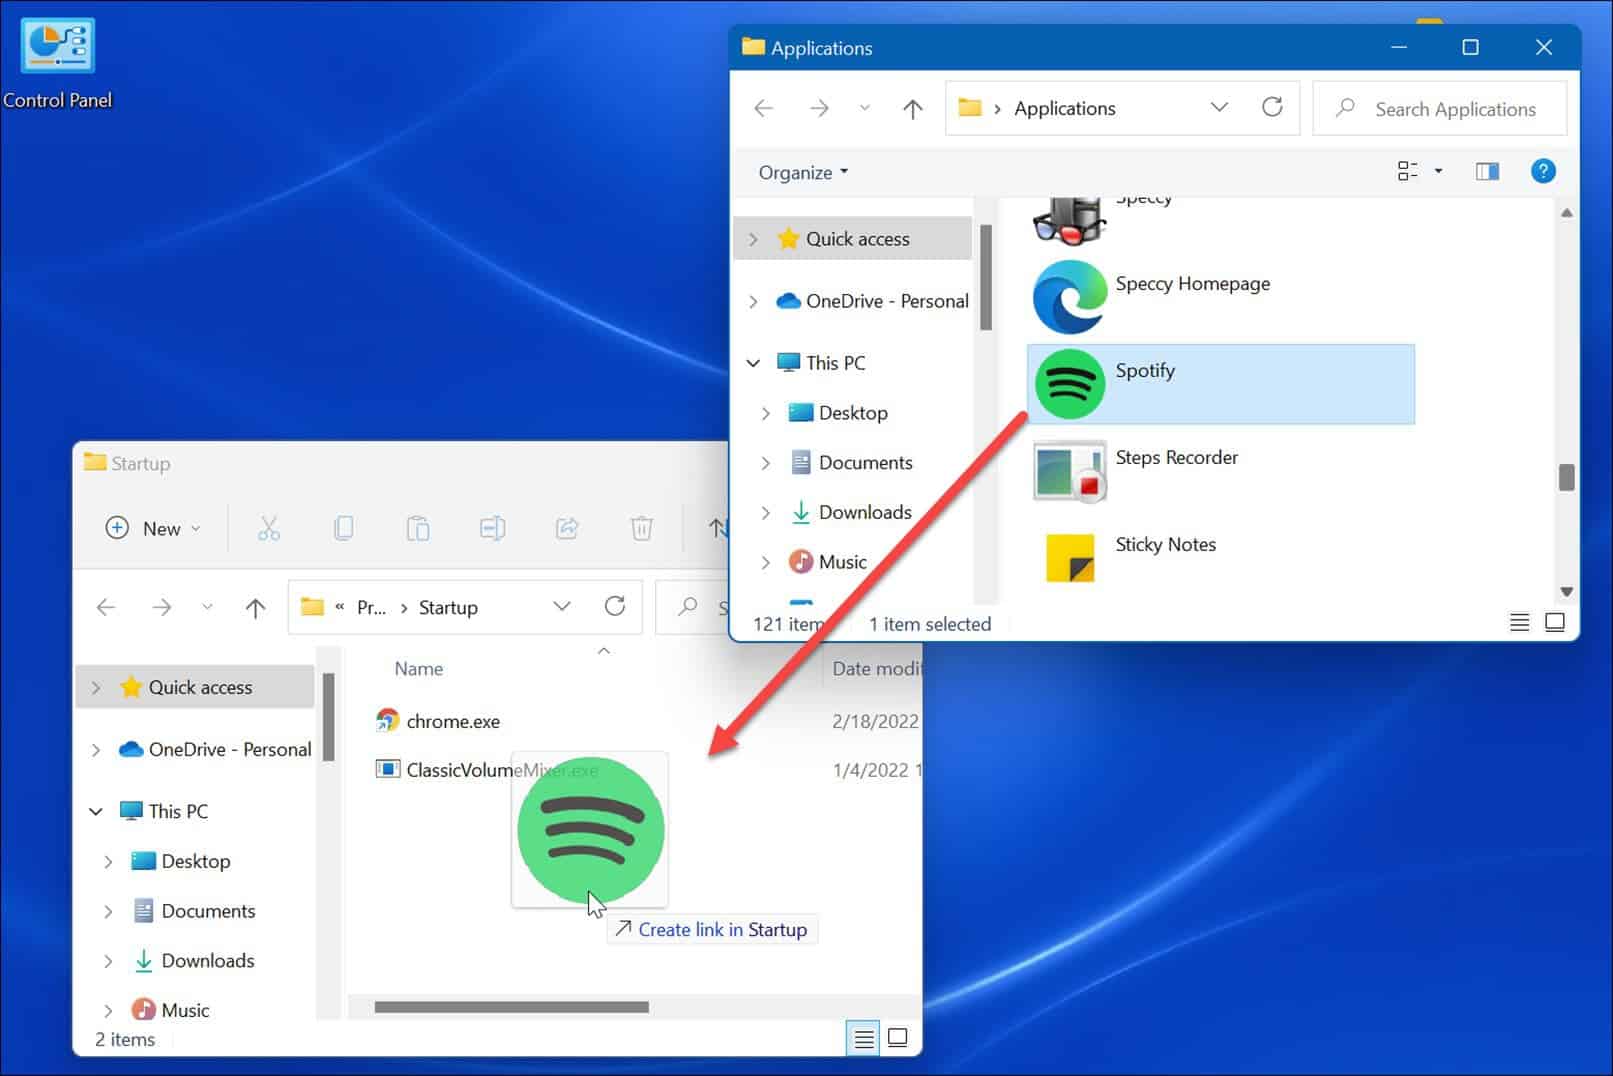 drag-n-drop-launch-apps-automatically-on-windows-11